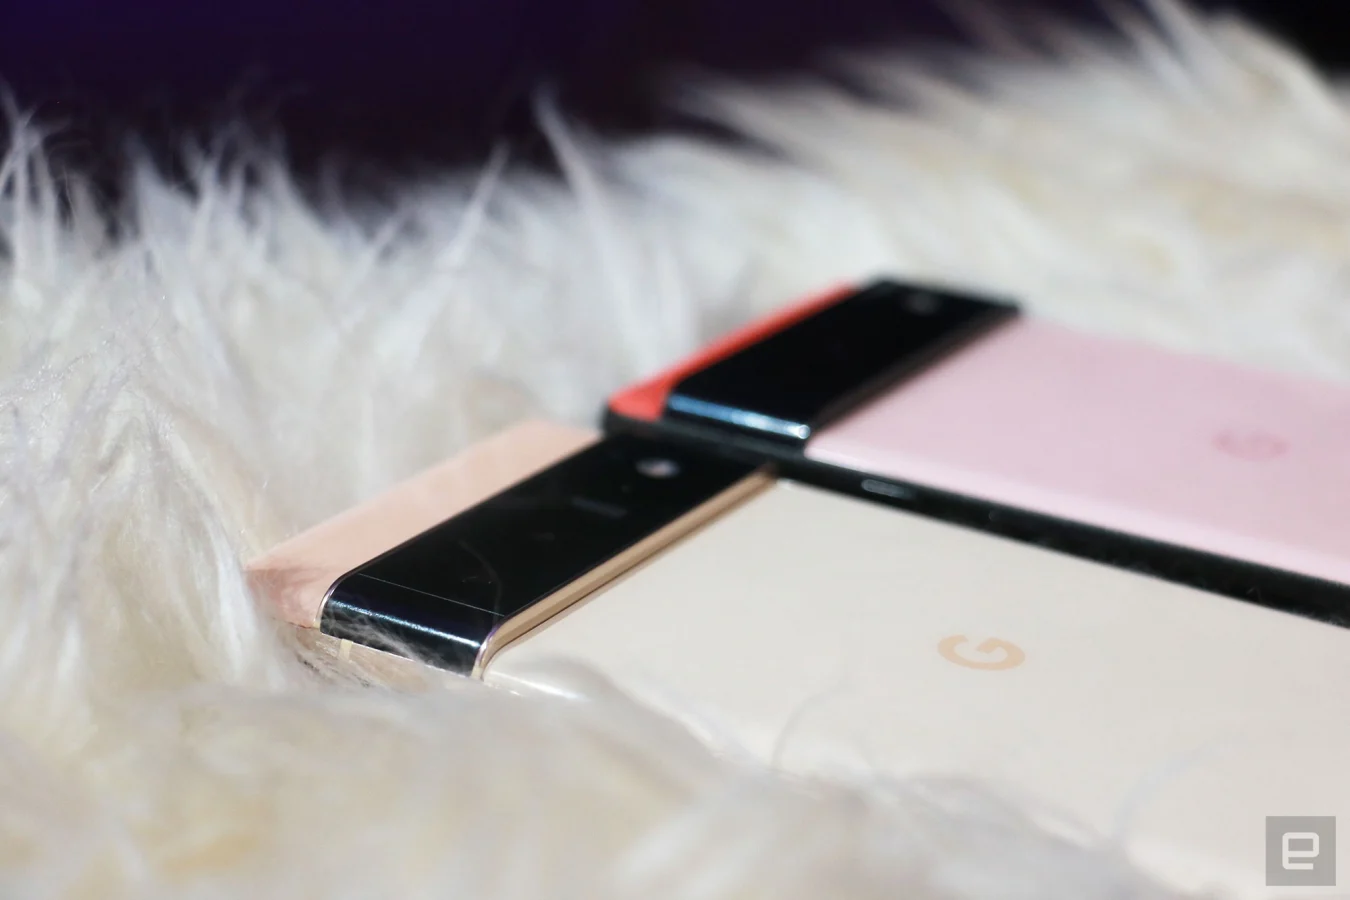 Close ups of the Pixel 6 and Pixel 6 Pro camera bumps as the phones are laid out on a furry surface.